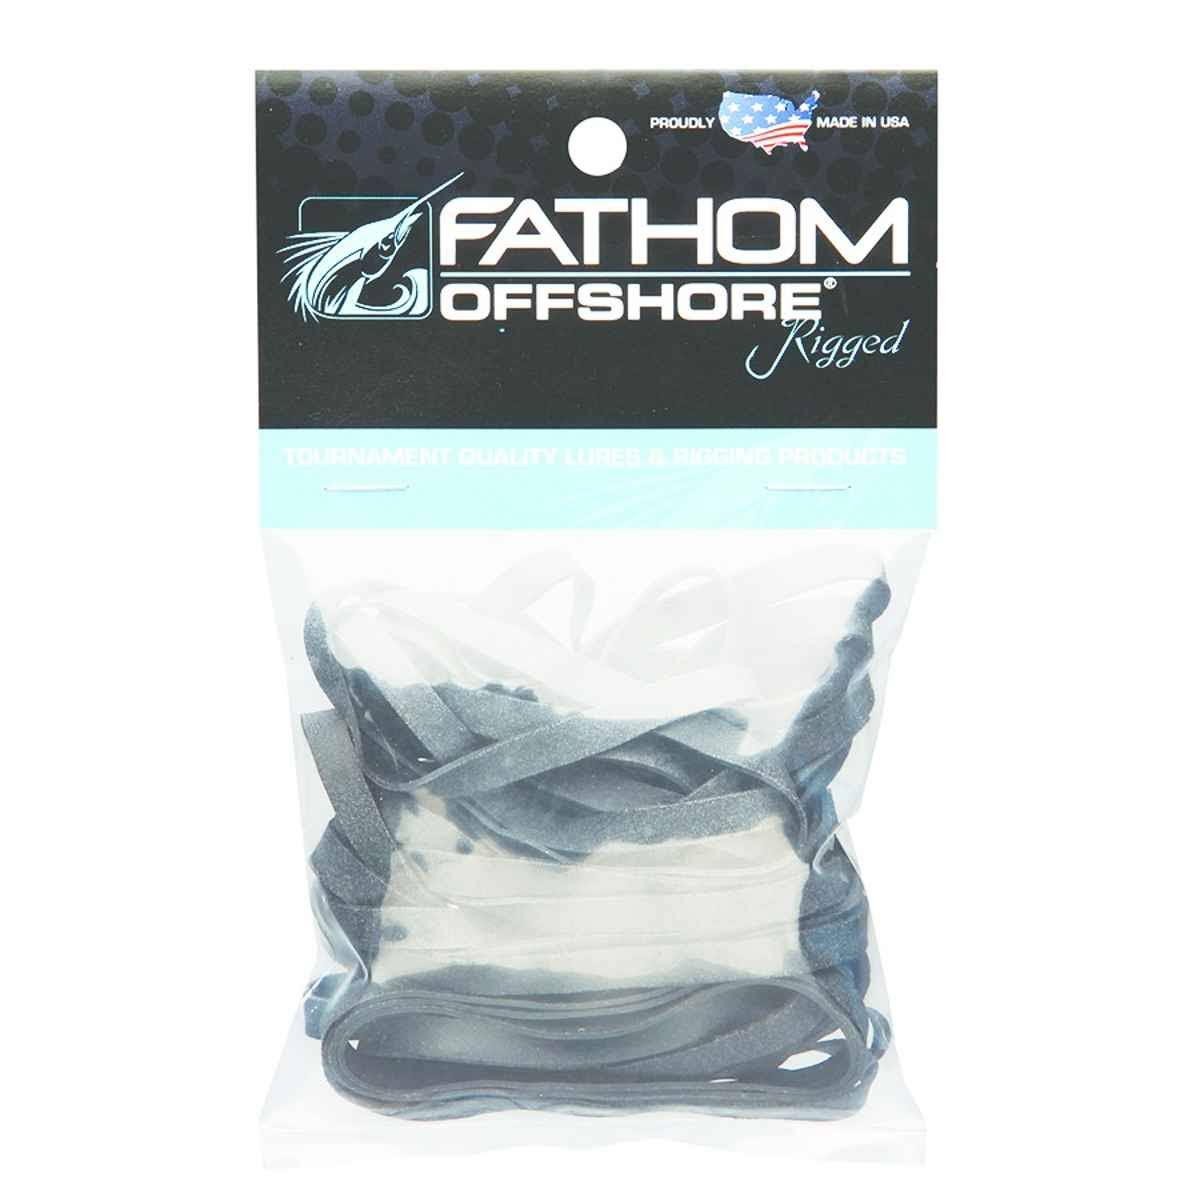 Fathom Offshore Rubber Bands - RB-64